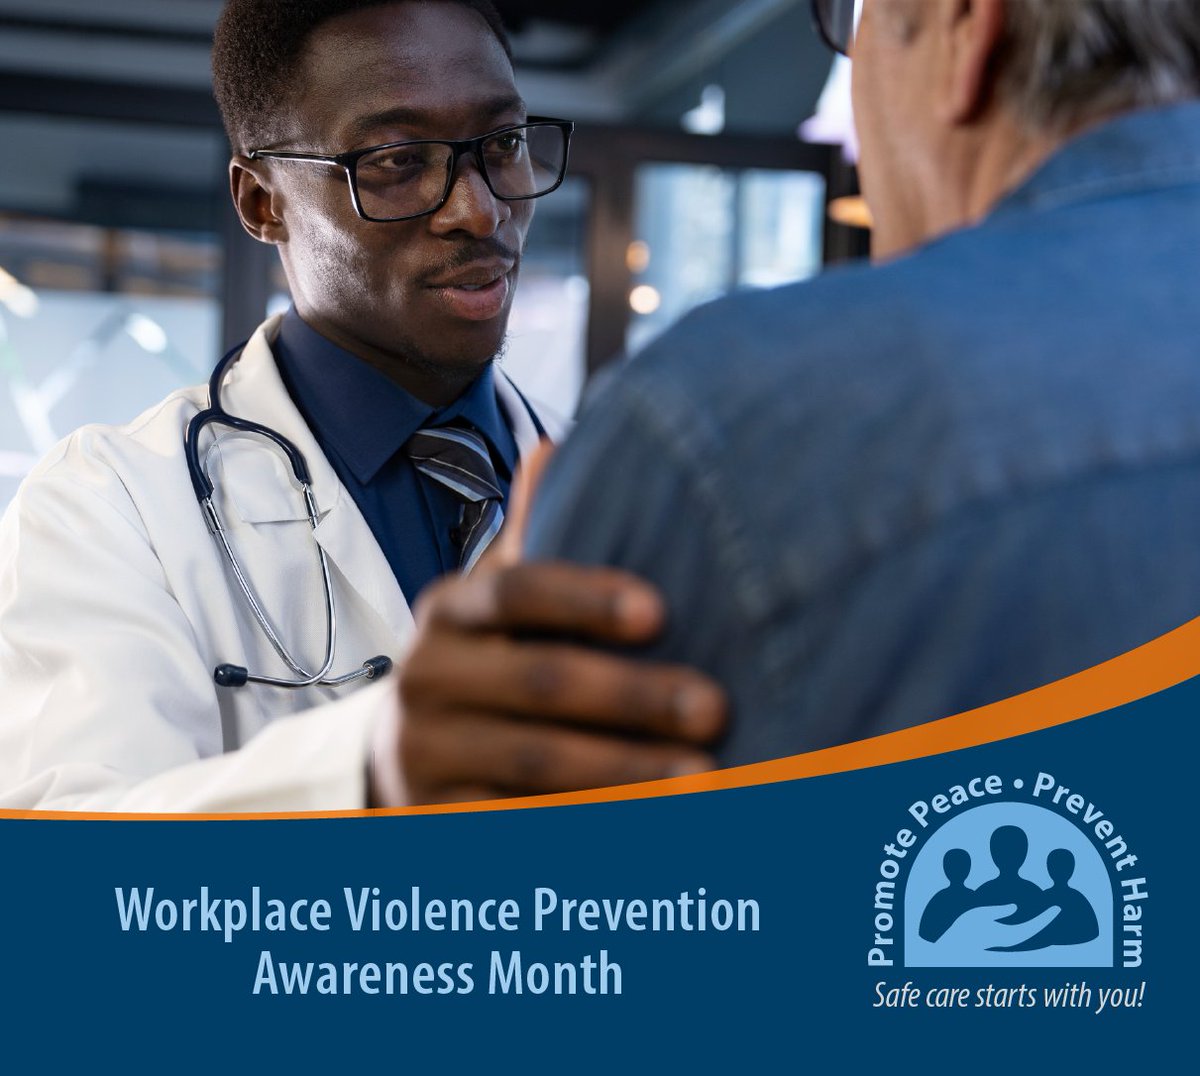 With the rise of workplace violence and its impact on an already worn-down workforce, action is needed to increase caregiver safety. Watch this webinar for preventing and responding to violence: tmfnetworks.org/link?u=6c4bab #WorkplaceViolencePrevention #STOPWorkplaceViolence